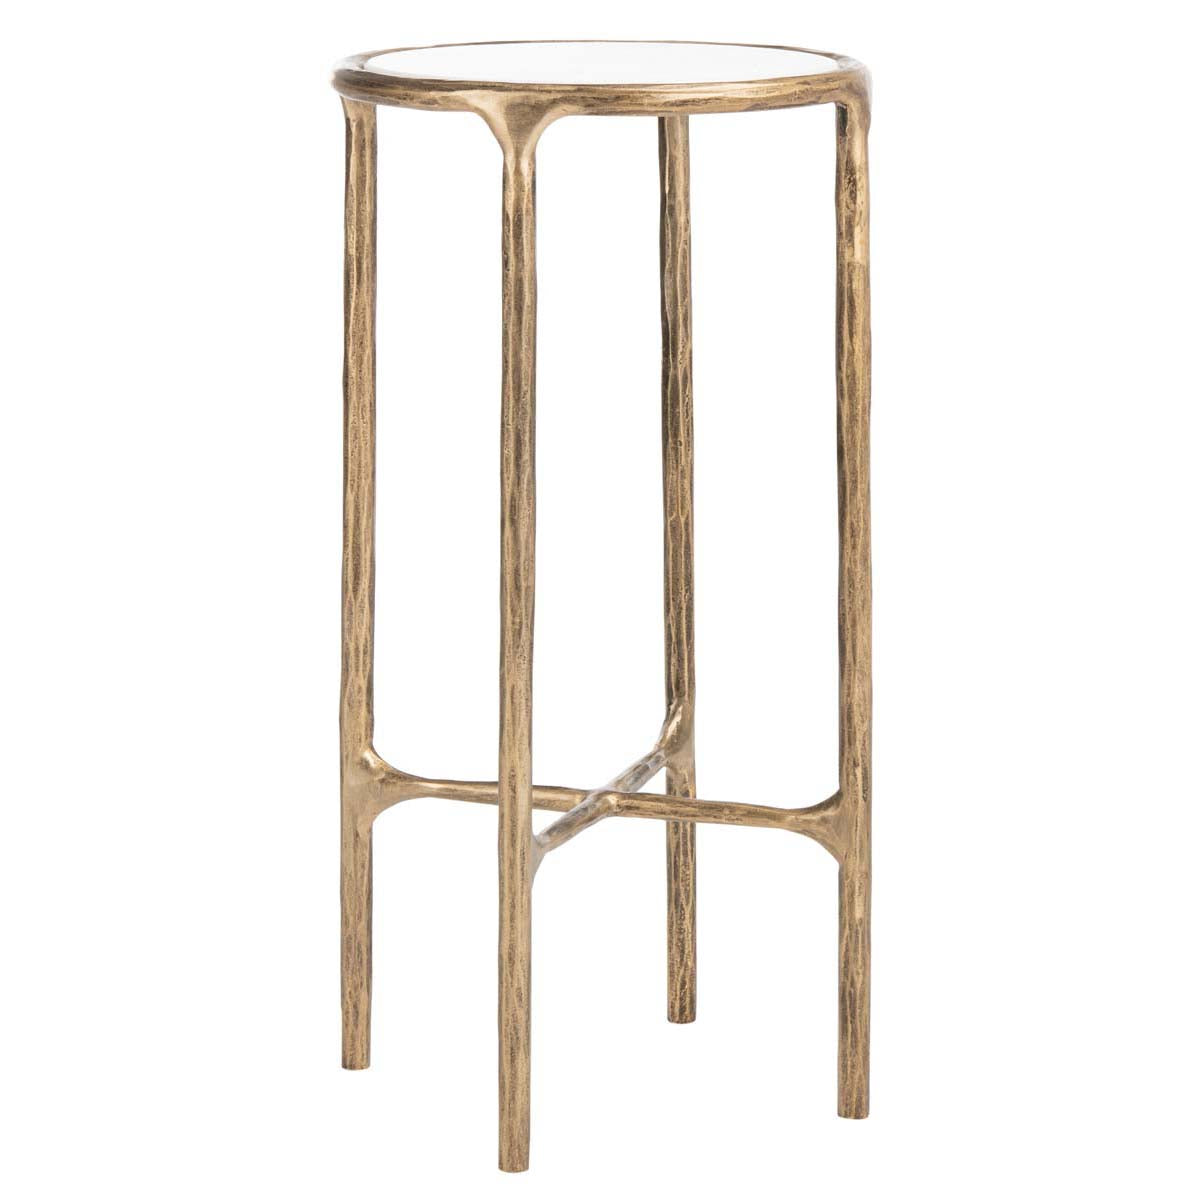 Safavieh Couture Jessa Forged Metal Tall Round End Table - Brass / White